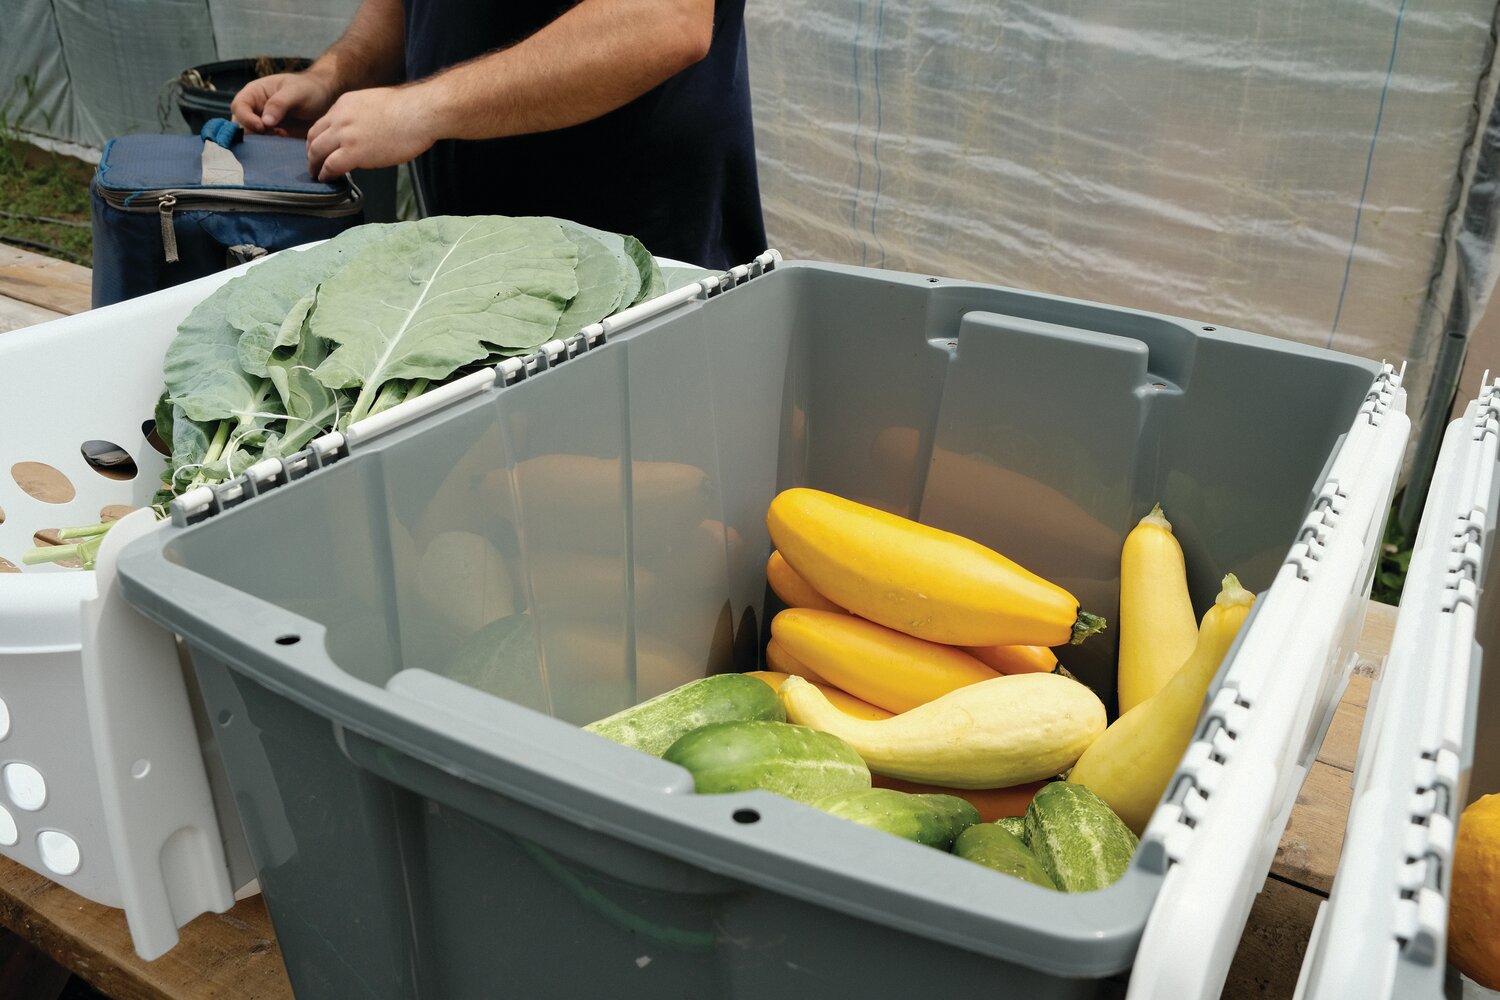 READY FOR MARKET: Bins of freshly harvested squash, cucumbers, and collard greens are ready to be sold at the next farmers market, on July 29th in Providence. Bami growers generally sell at between one and three markets per month during the growing season.